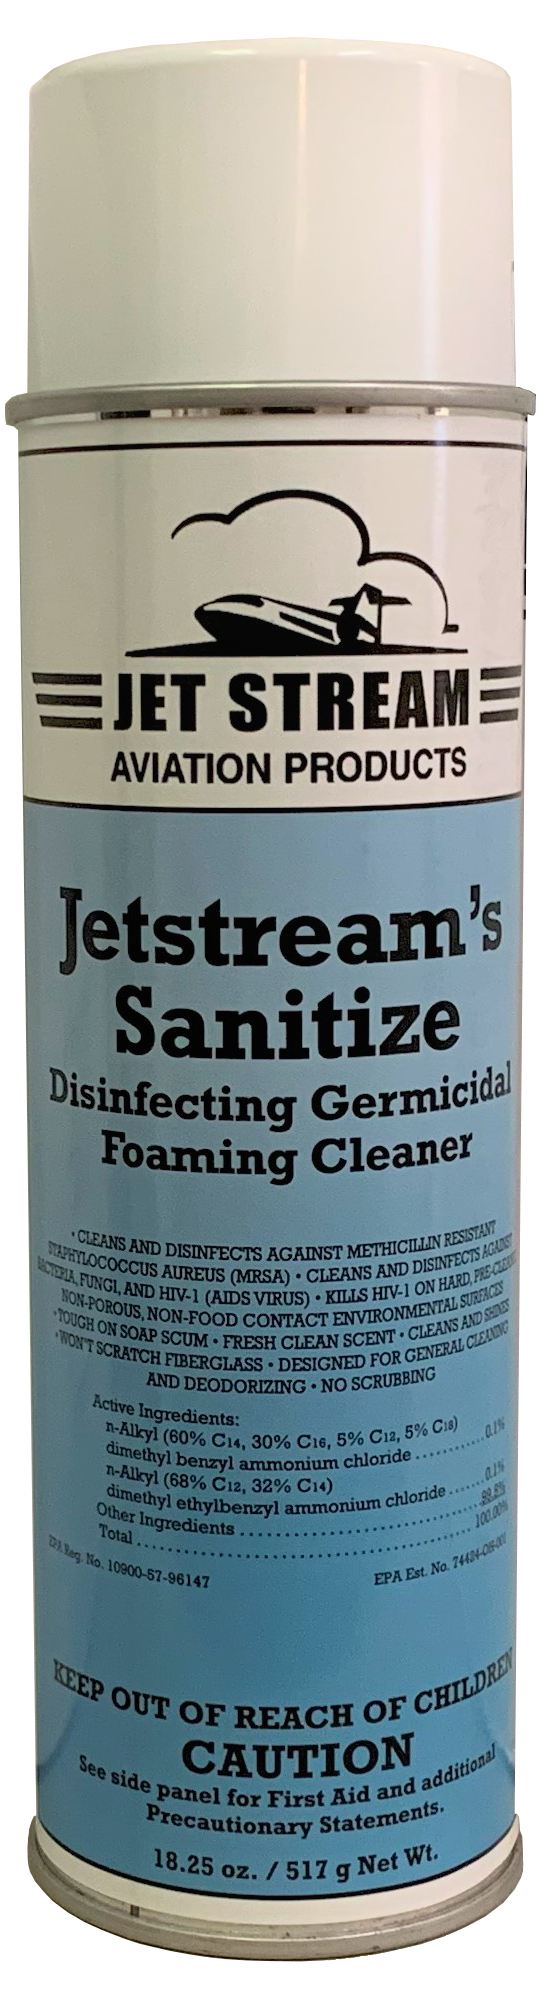 DJSS1 Sanitize Disinfecting Germicidal Foaming Cleaner 18.25oz